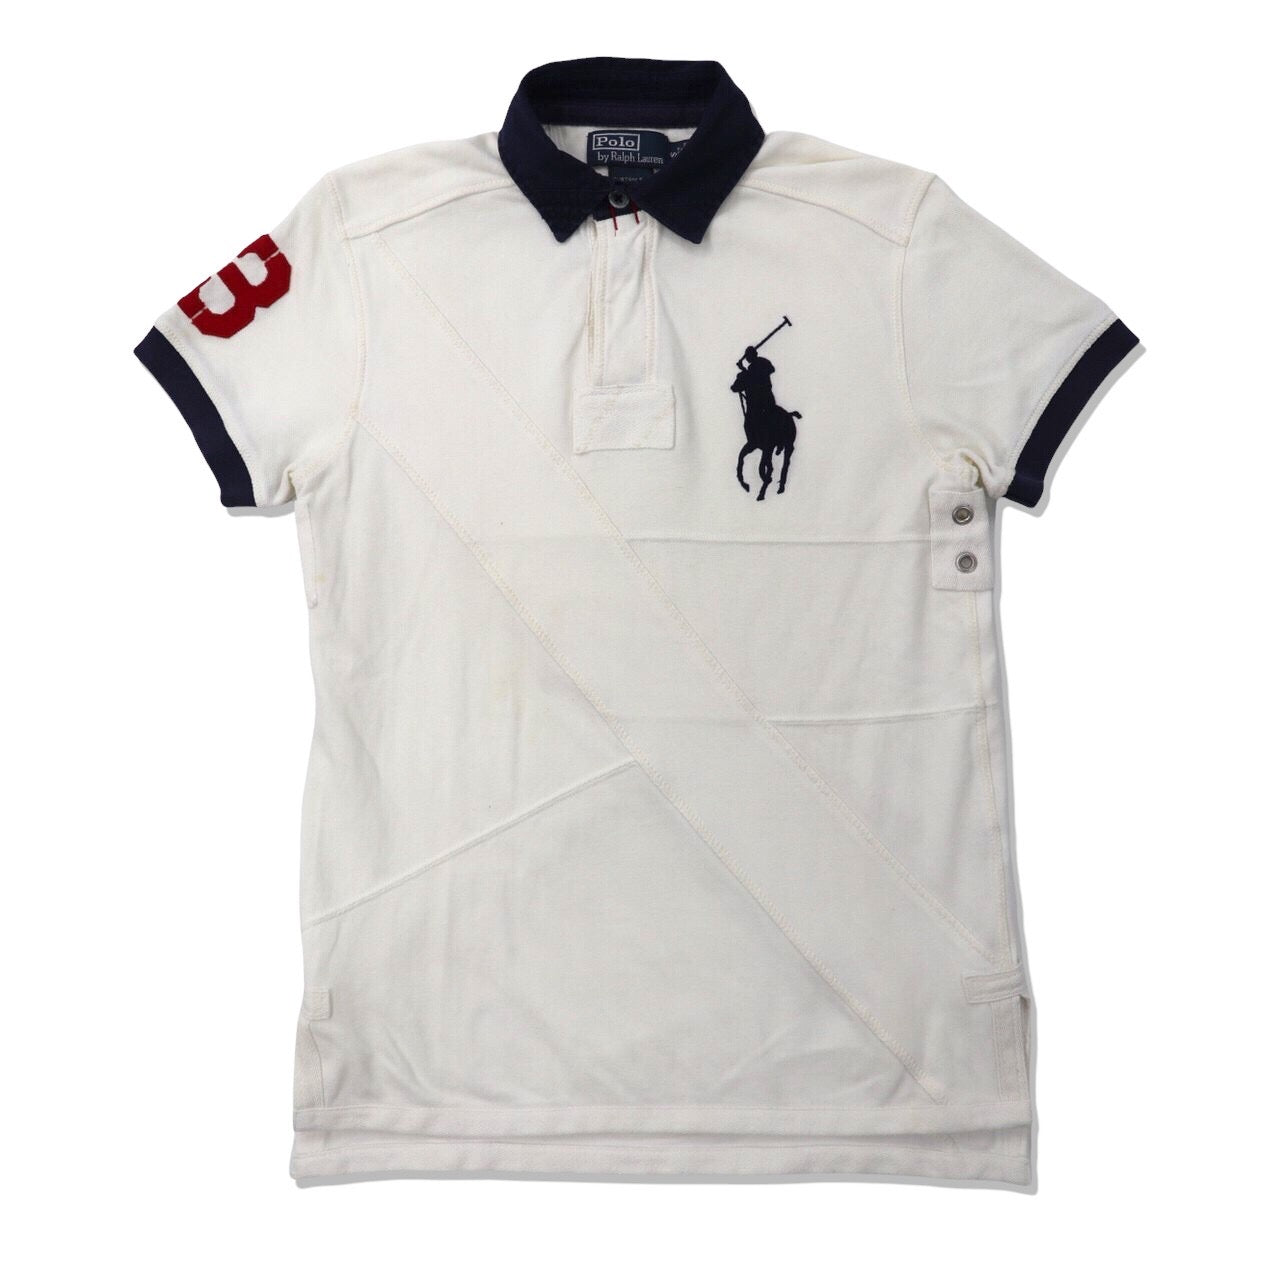 POLO BY RALPH LAUREN Polo Shirt S White Cotton Custom Fit